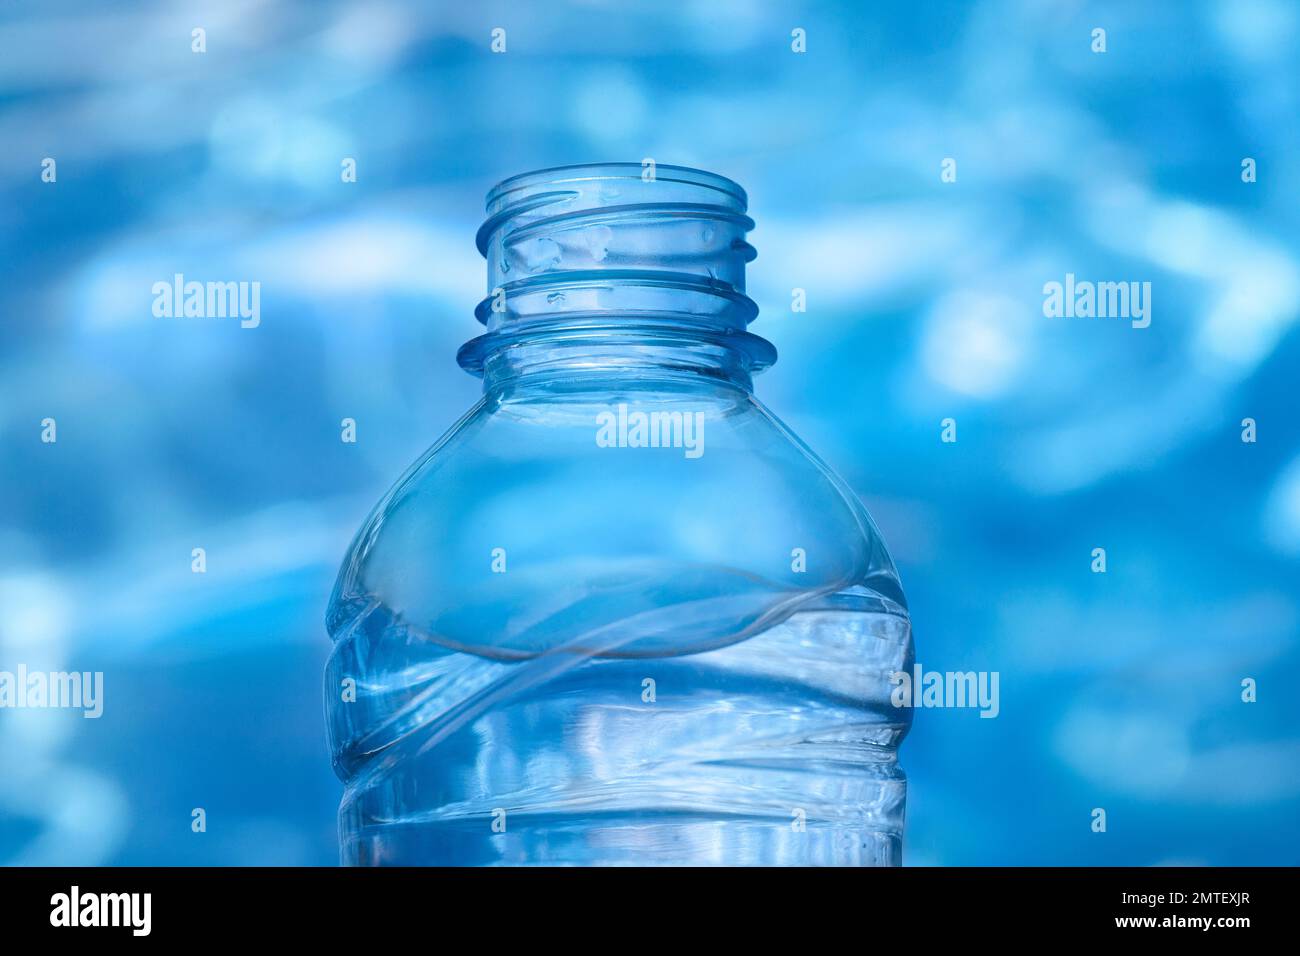 https://c8.alamy.com/comp/2MTEXJR/close-up-view-of-plastic-bottle-full-of-water-against-blue-color-water-background-with-light-reflections-2MTEXJR.jpg